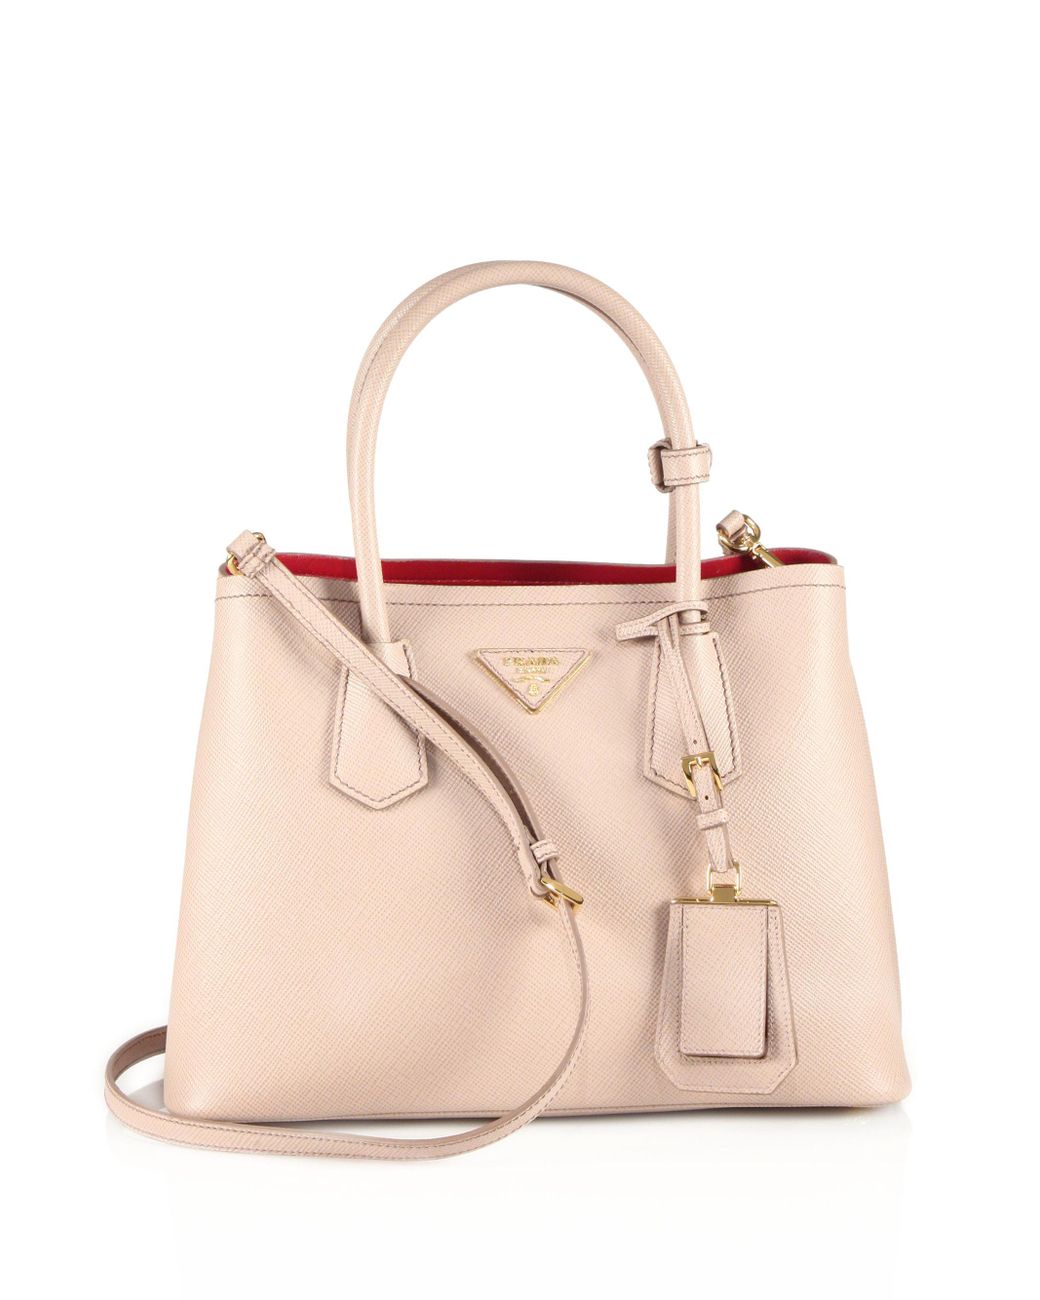 Prada Saffiano Cuir Small Double Bag in Natural | Lyst